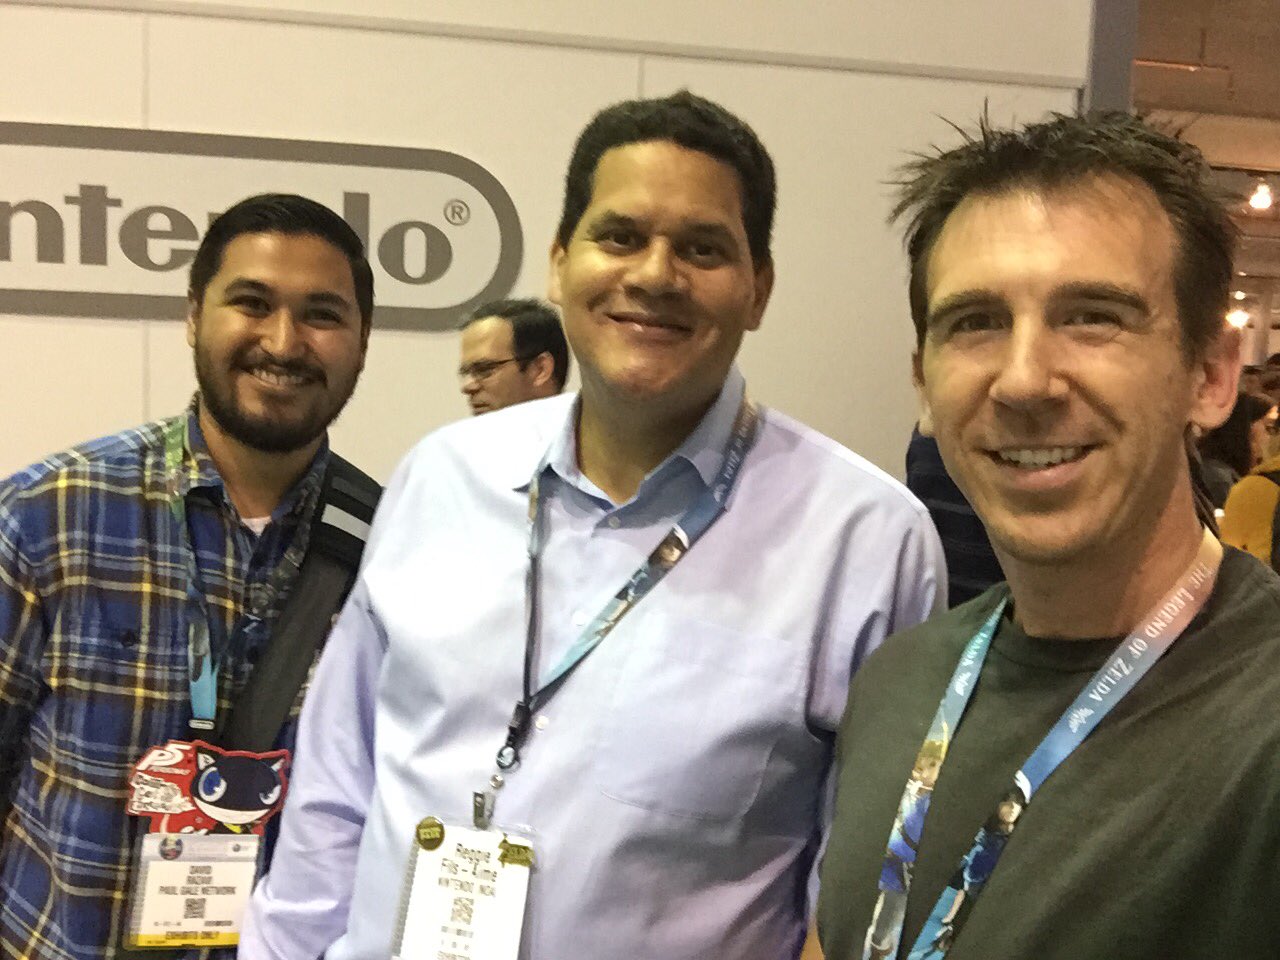 Nintendo of America president, Reggie Fils-Aime, with Paul Gale Network at E3 2016